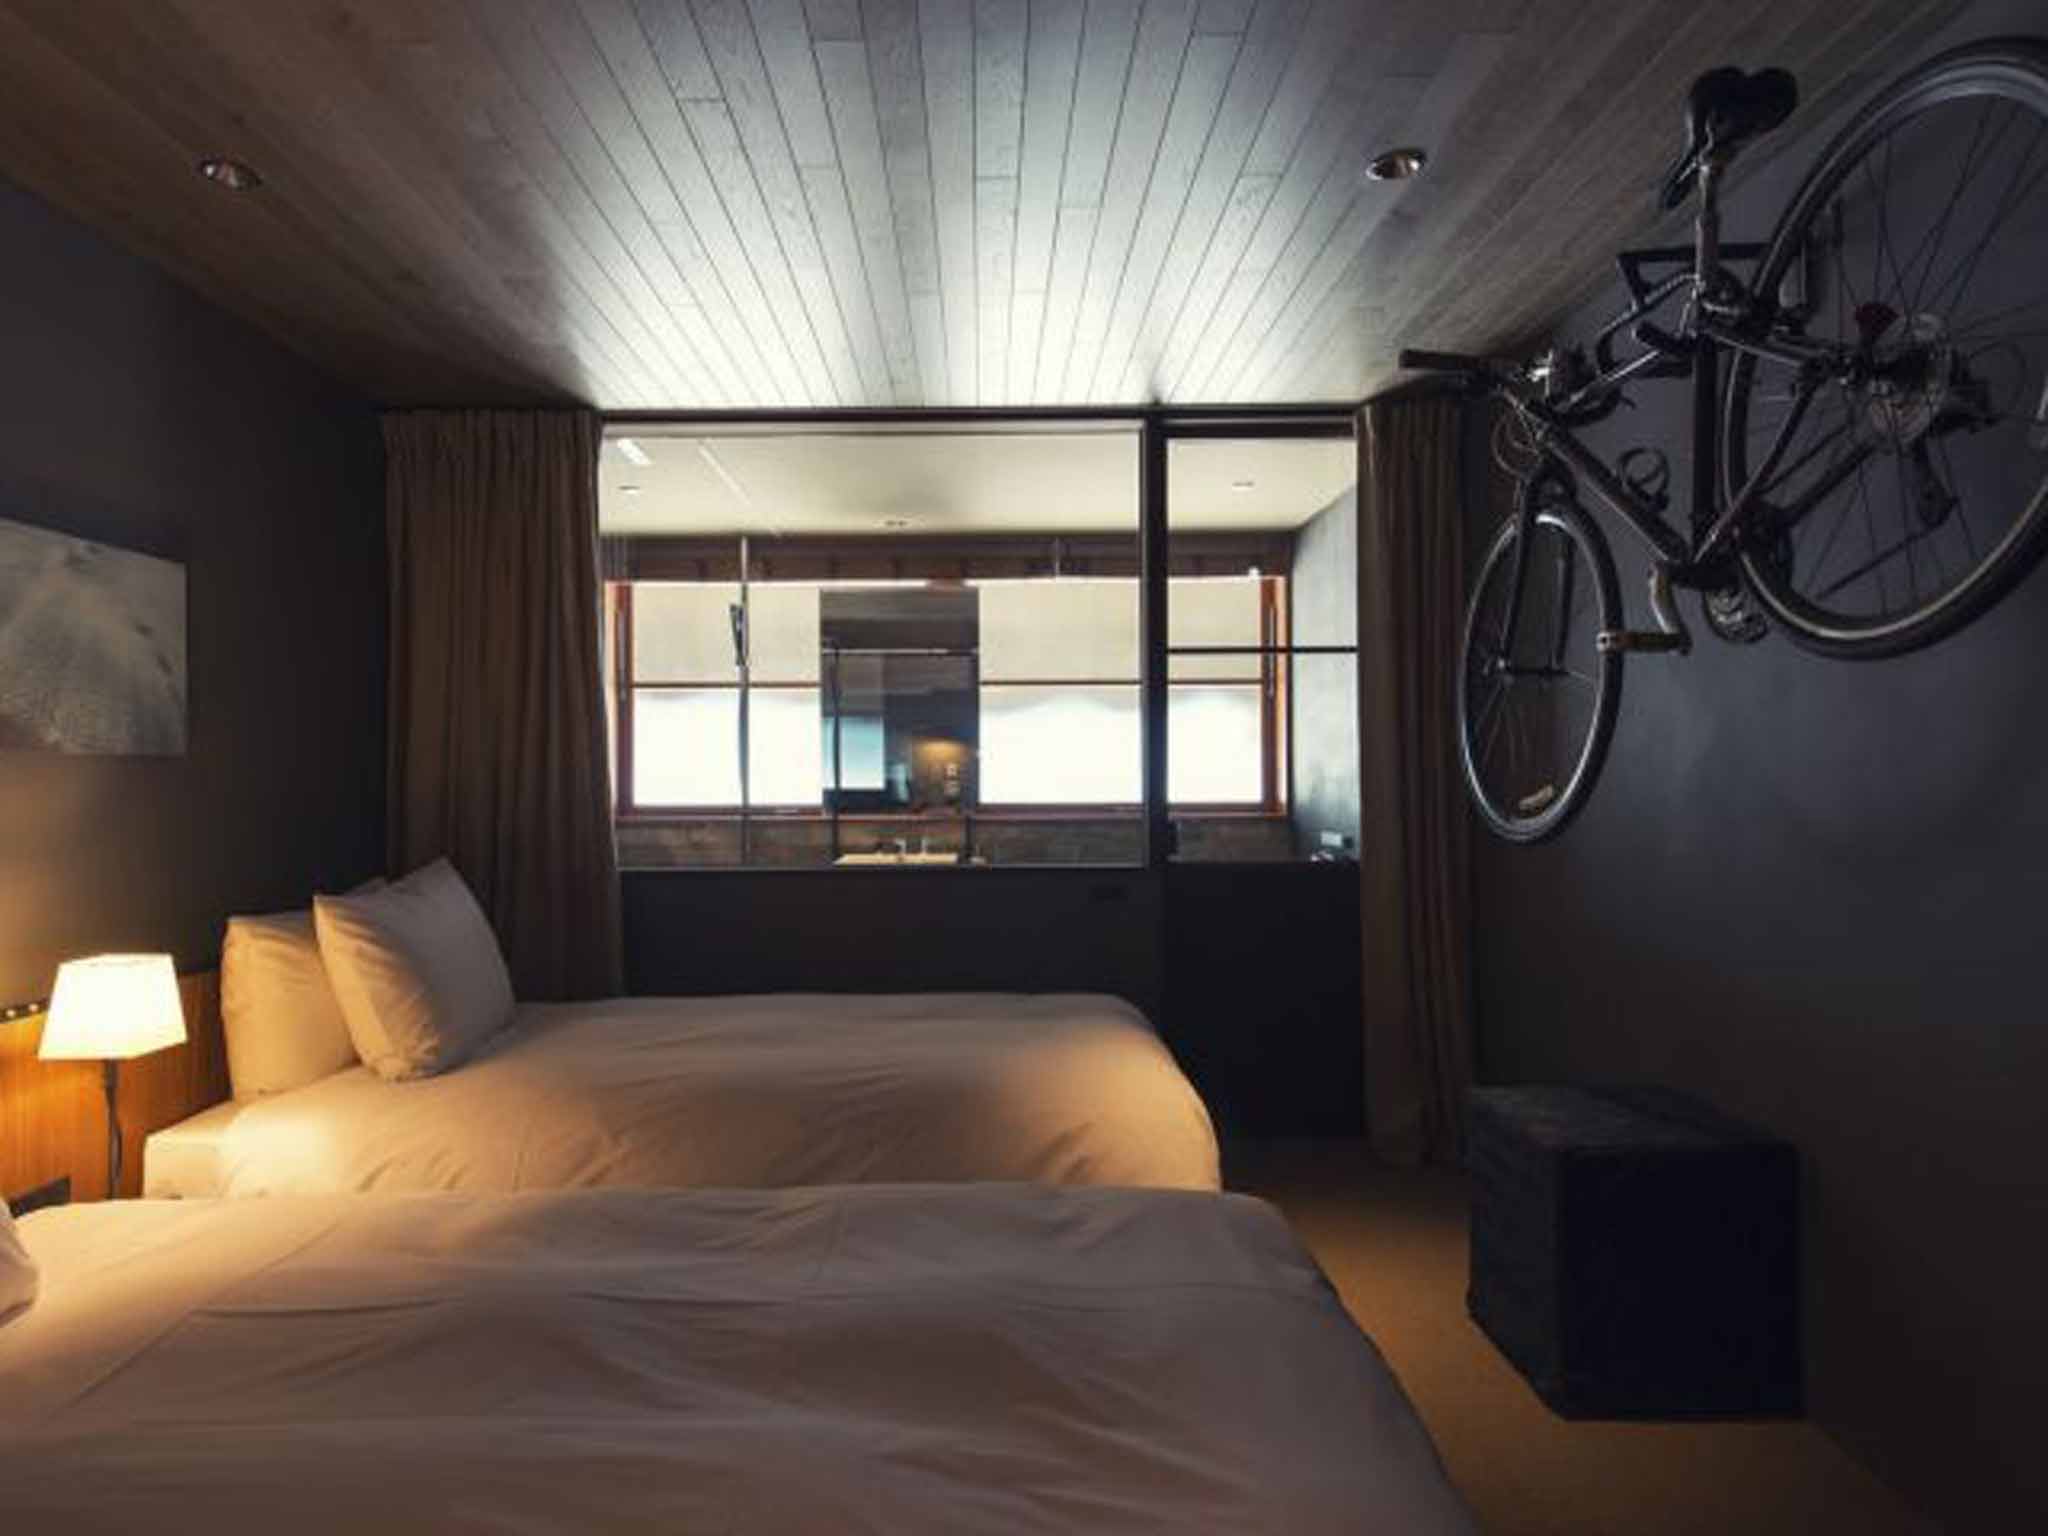 Hotel Cycle Japan A Bike Themed Pad That Takes Style Up